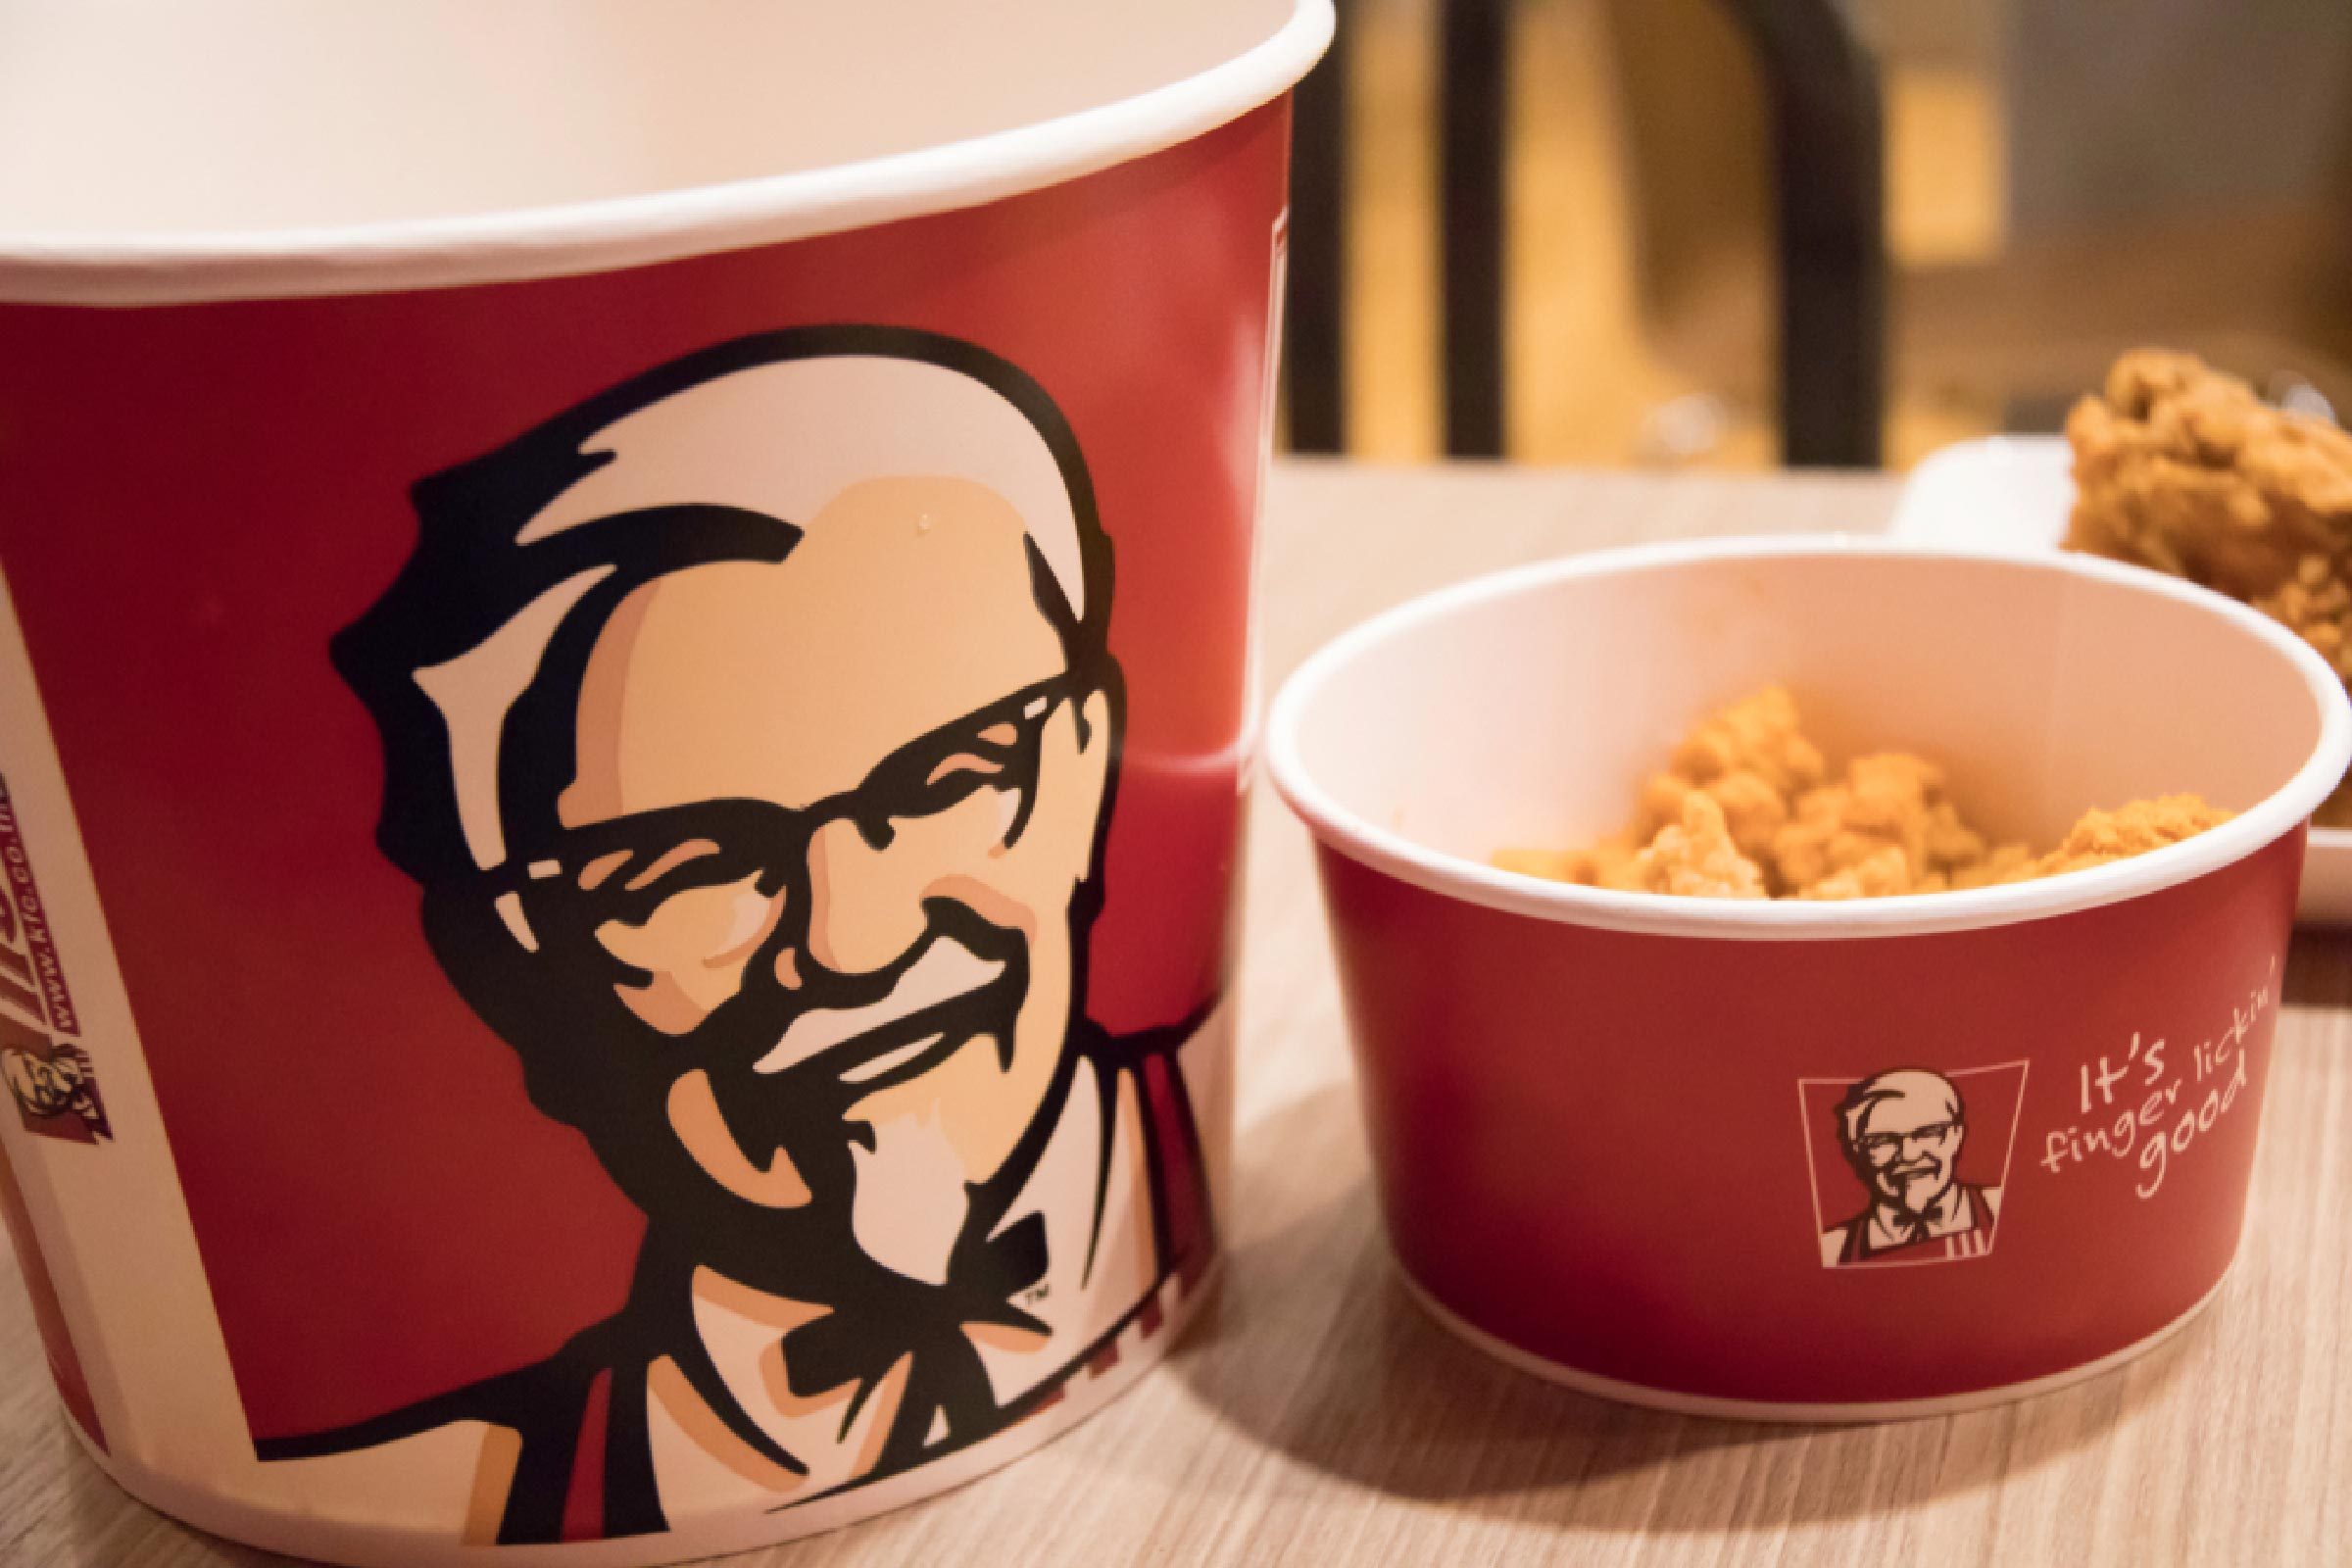 The Real Reason KFC Changed Its Name from Kentucky Fried Chicken